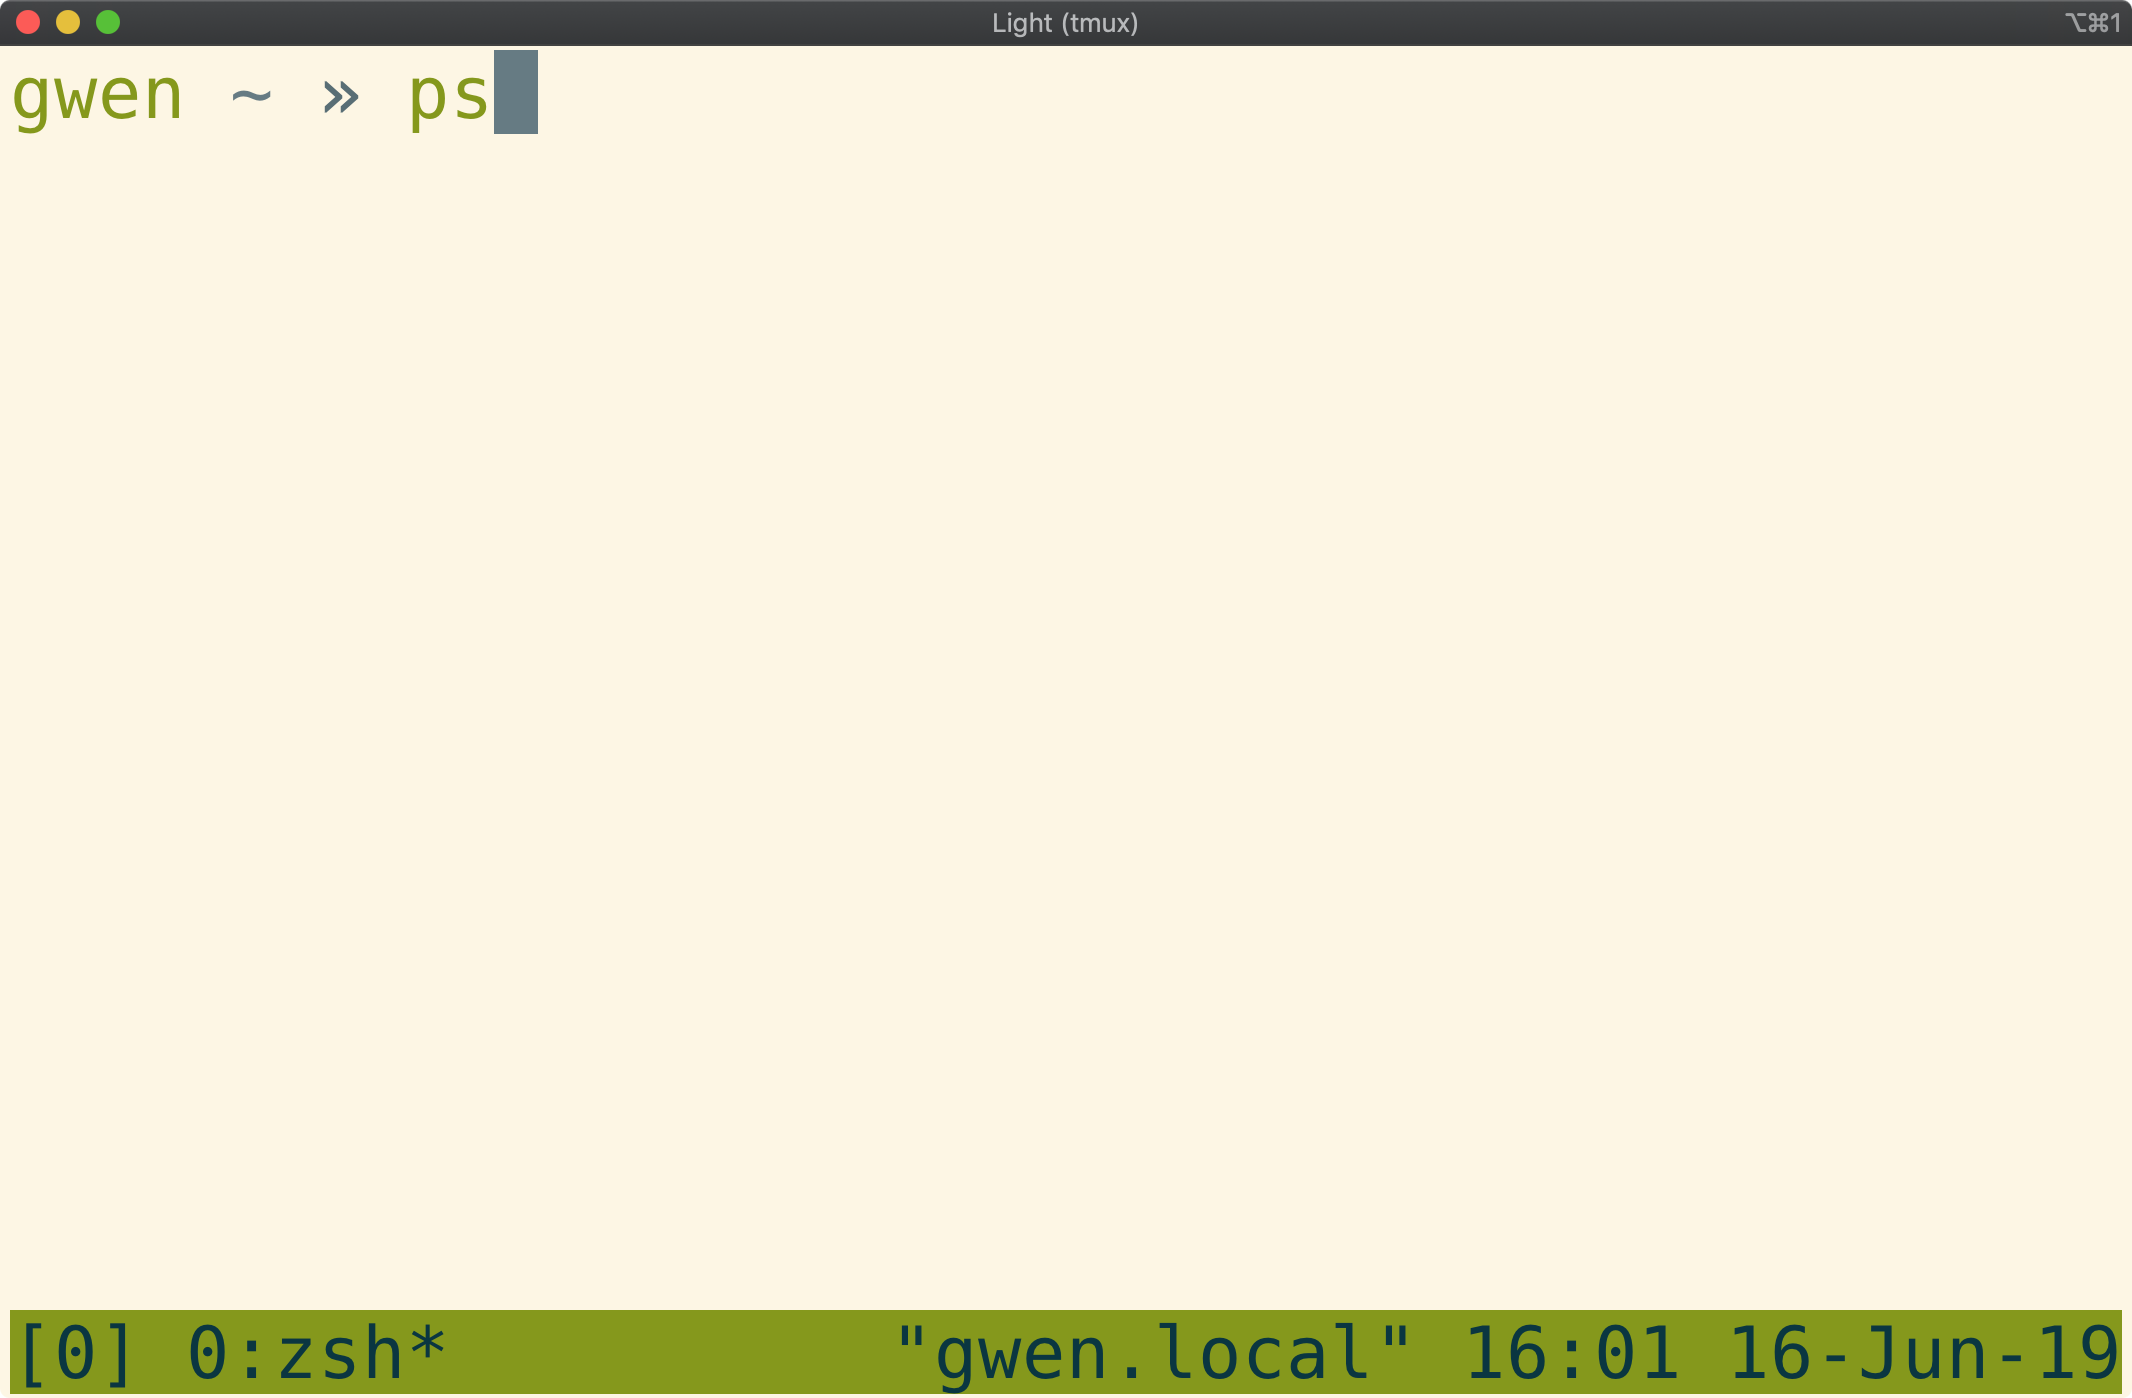 Tmux window with 'ps u' typed in a shell prompt